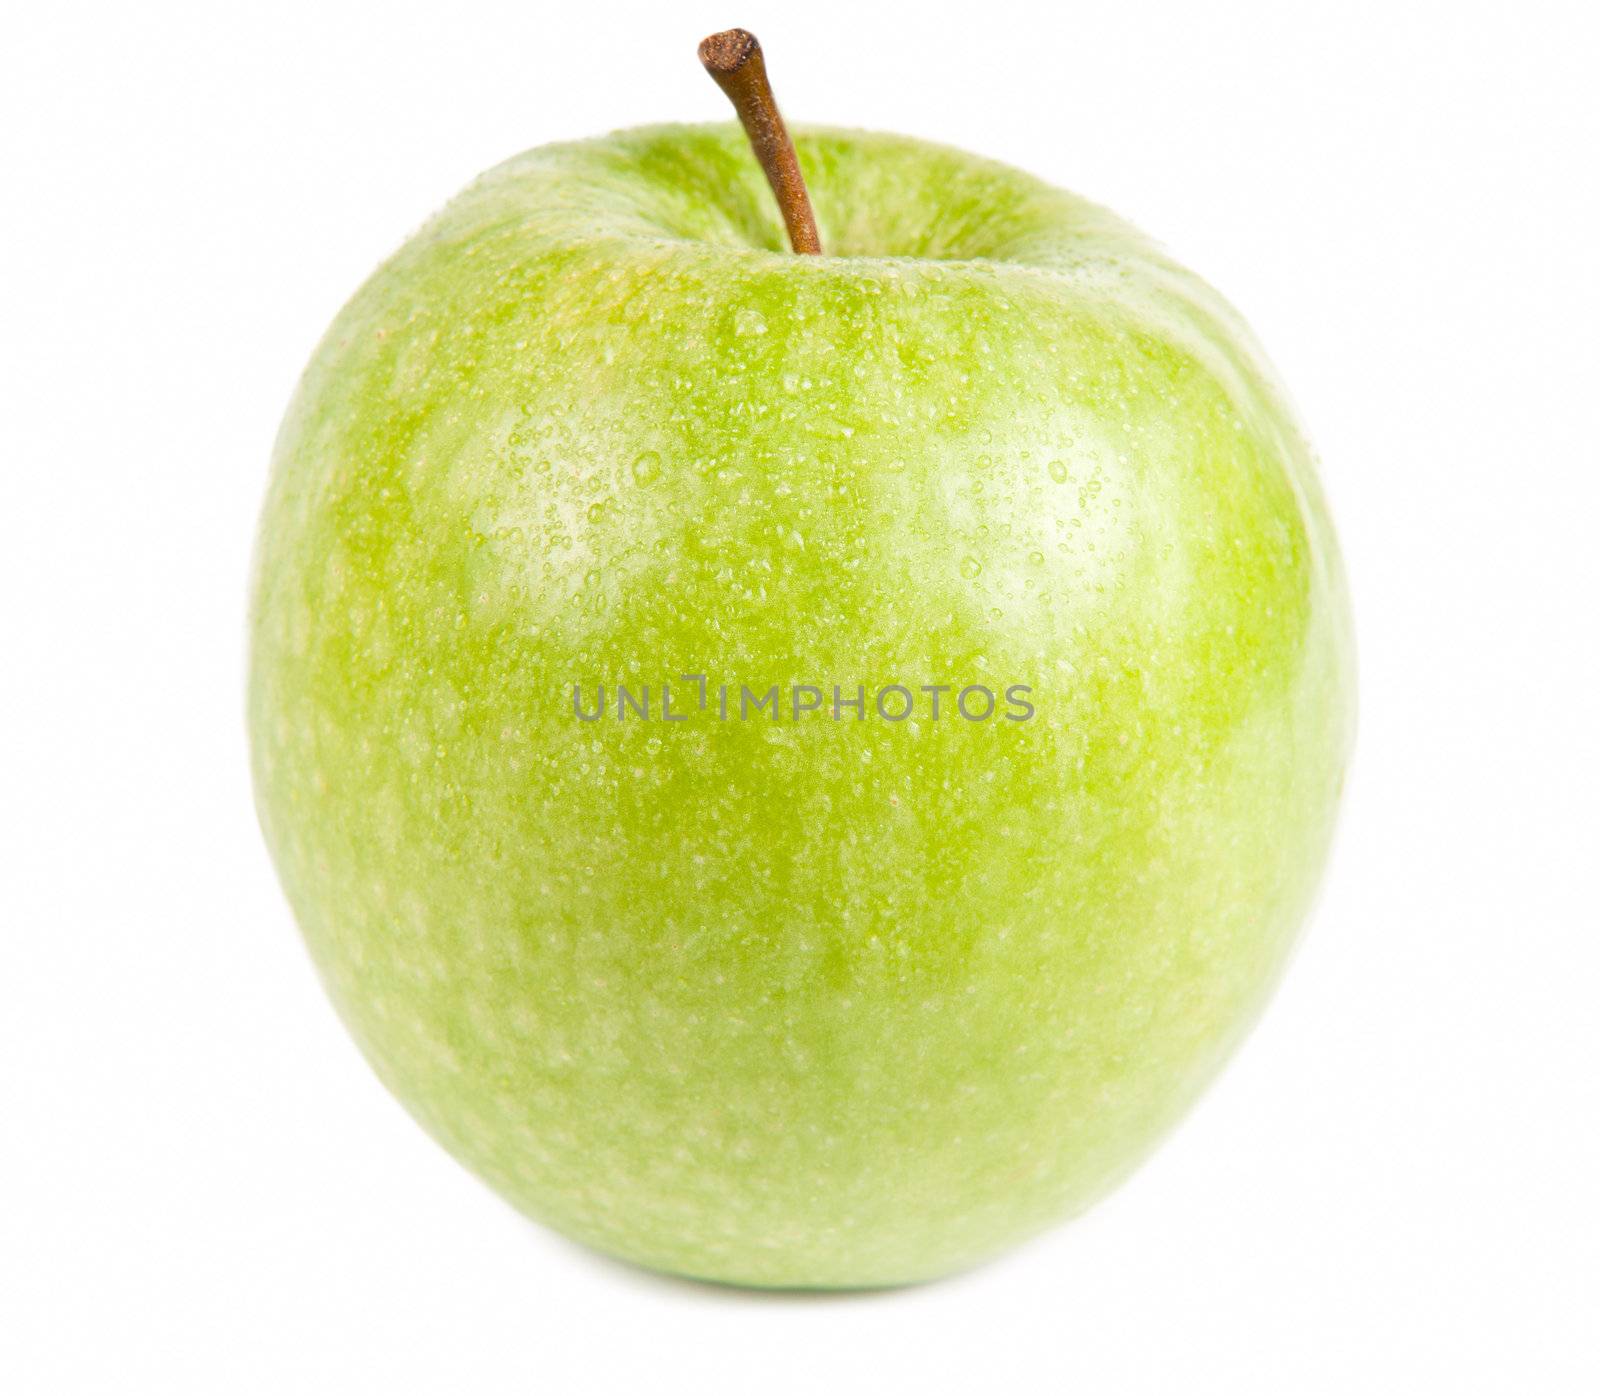 Isolated frontal shot of a fresh green apple with stem and drops of water on it.